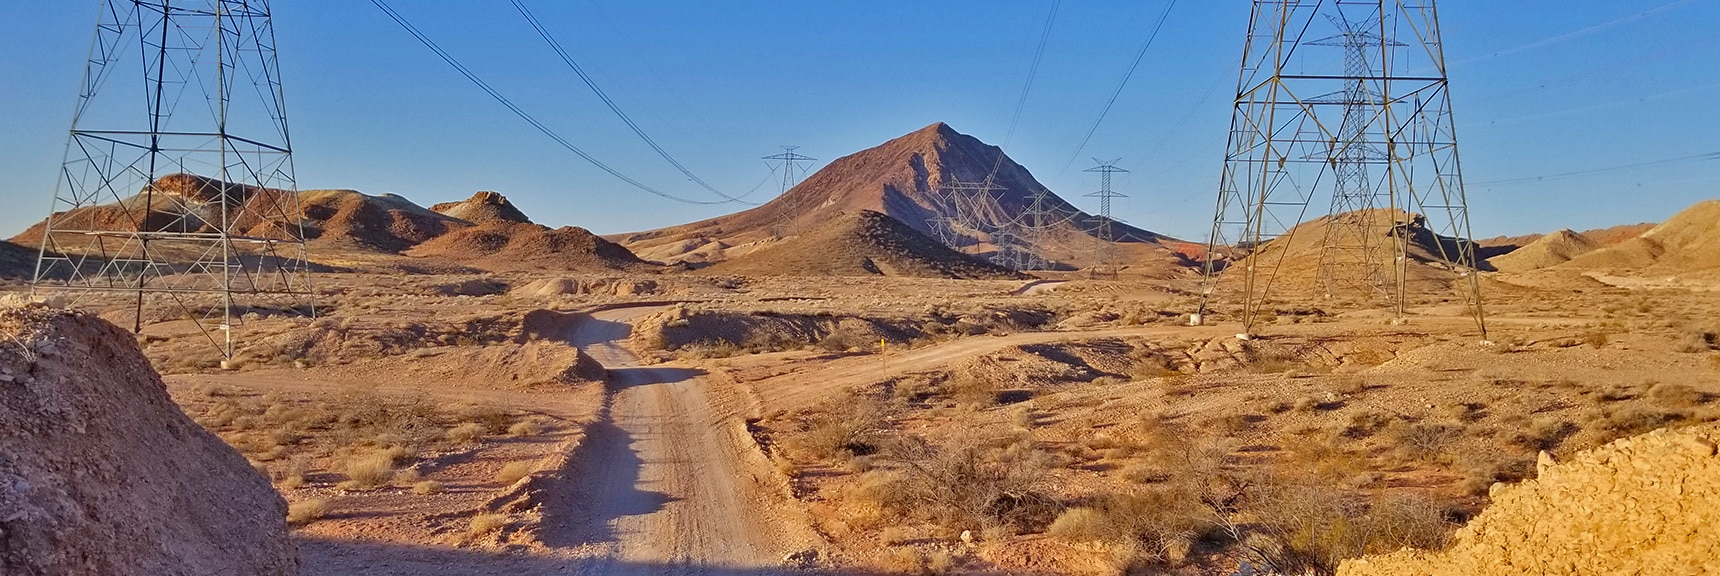 You Can Hear the Crackling of the Massive Power Lines Along This Route. | Lava Butte | Lake Mead National Recreation Area, Nevada